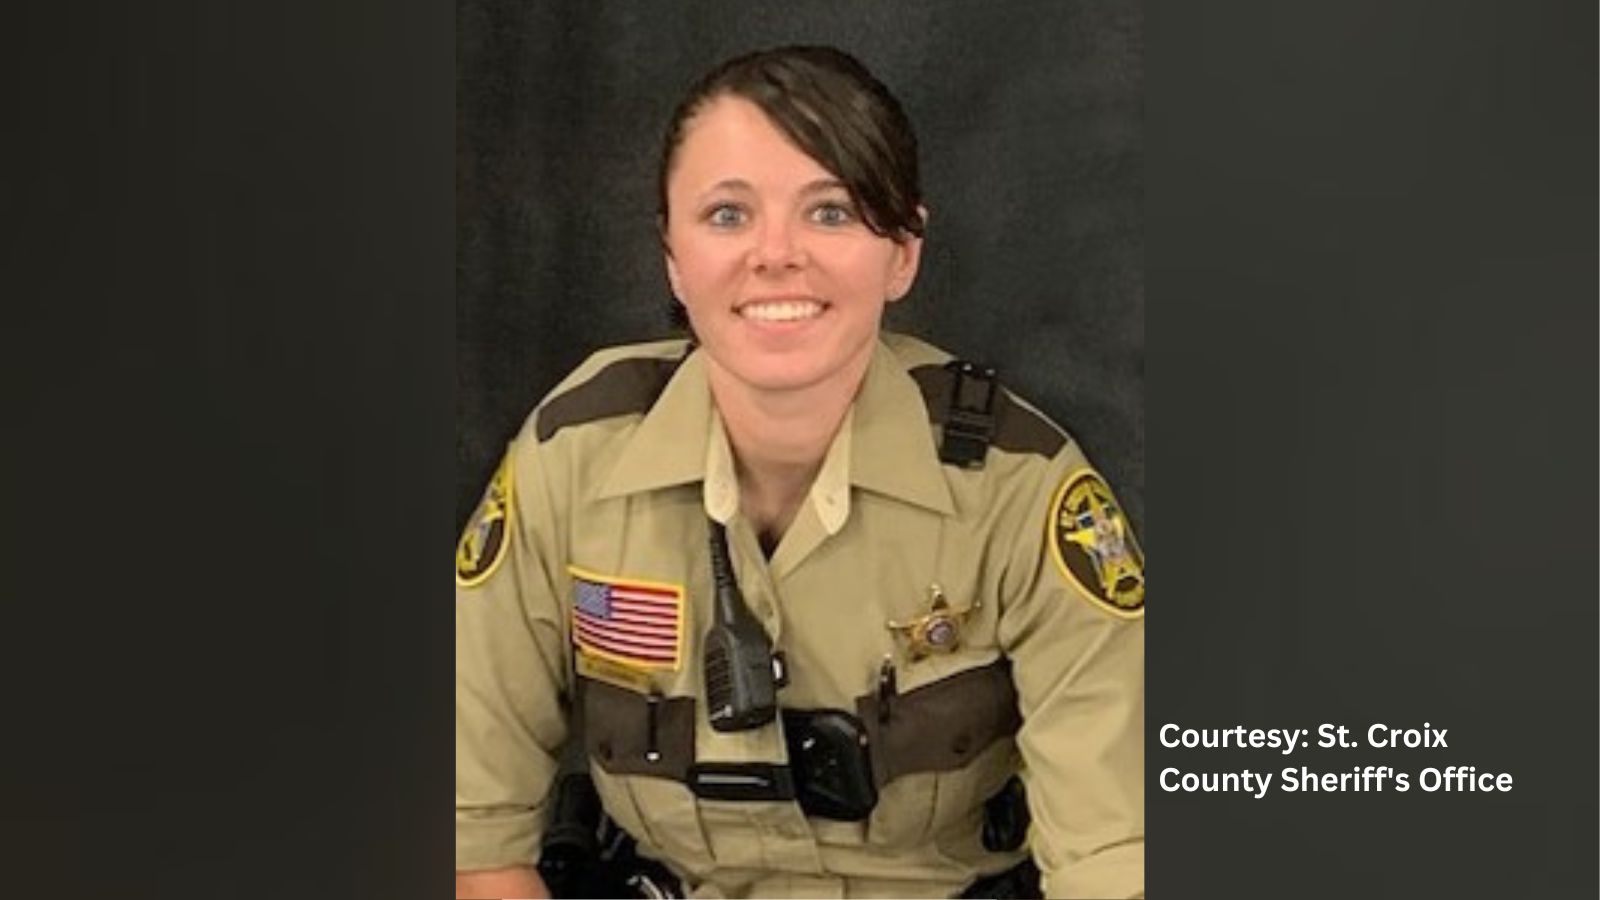 Deputy killed in St. Croix County Saturday evening